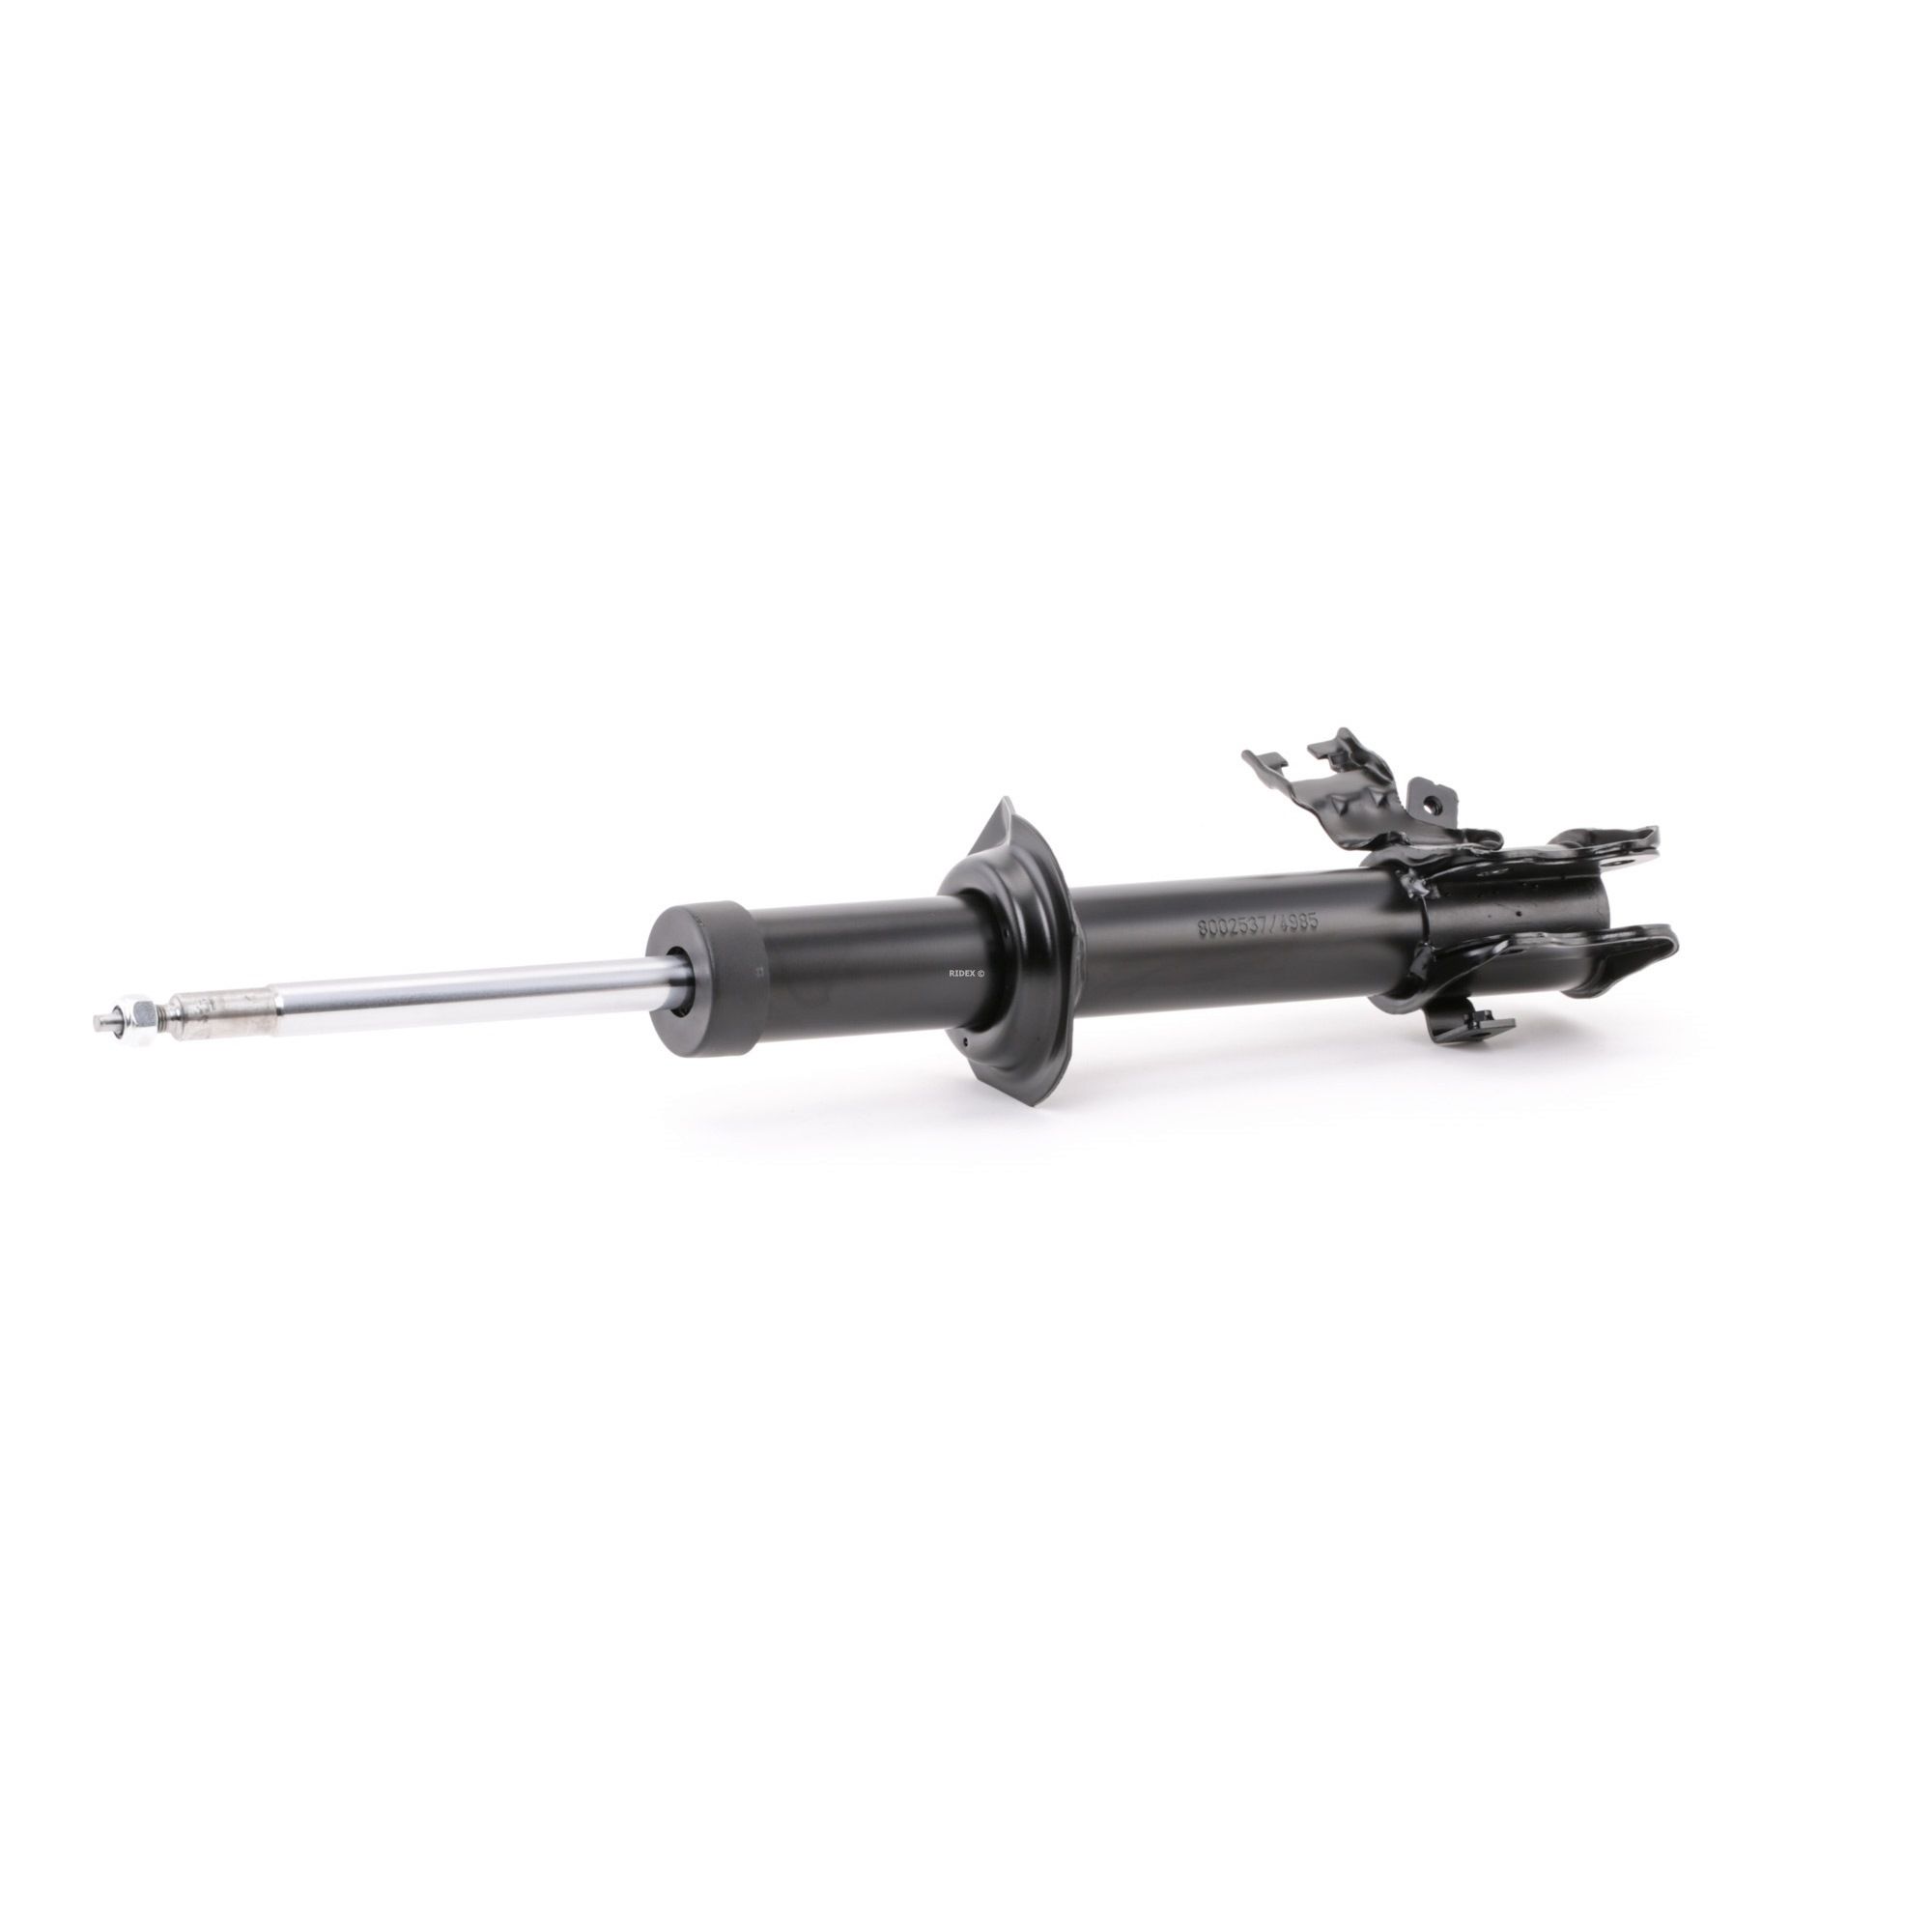 RIDEX 854S0947 Shock absorber Right, Front Axle, Oil Pressure, Gas Pressure, 555x415 mm, Twin-Tube, Suspension Strut, Top pin, Bottom Clamp